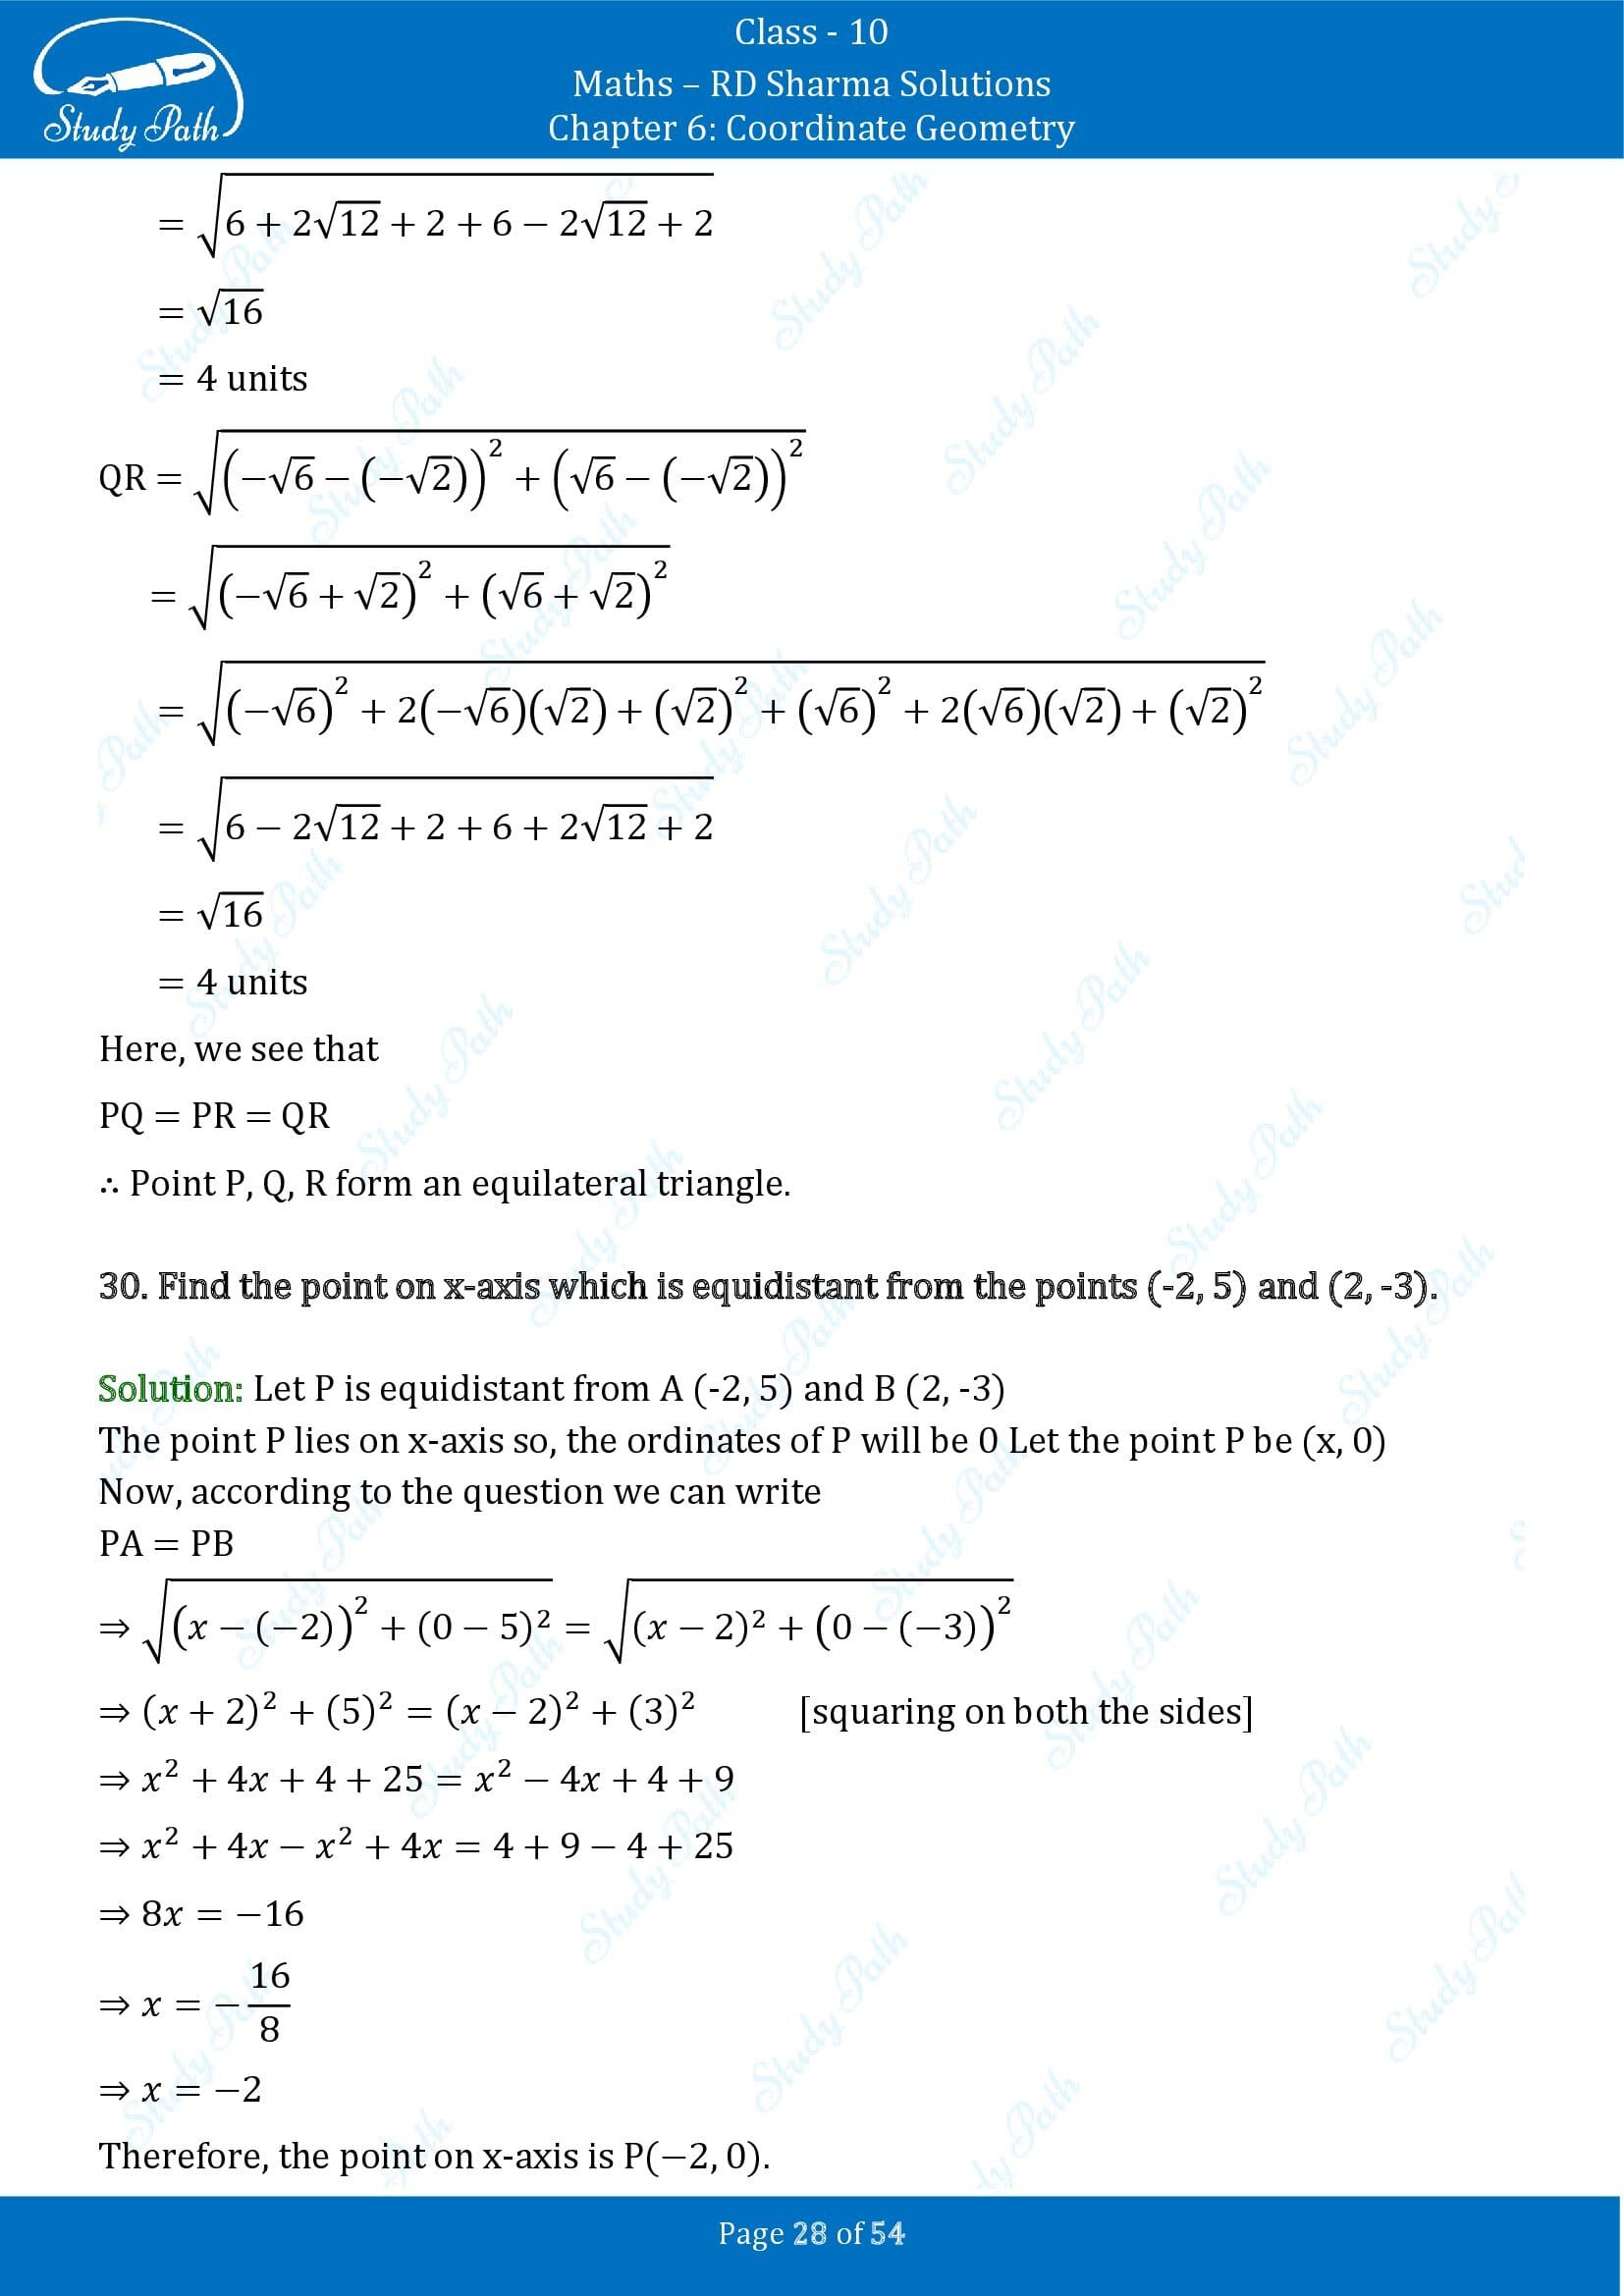 RD Sharma Solutions Class 10 Chapter 6 Coordinate Geometry Exercise 6.2 0028